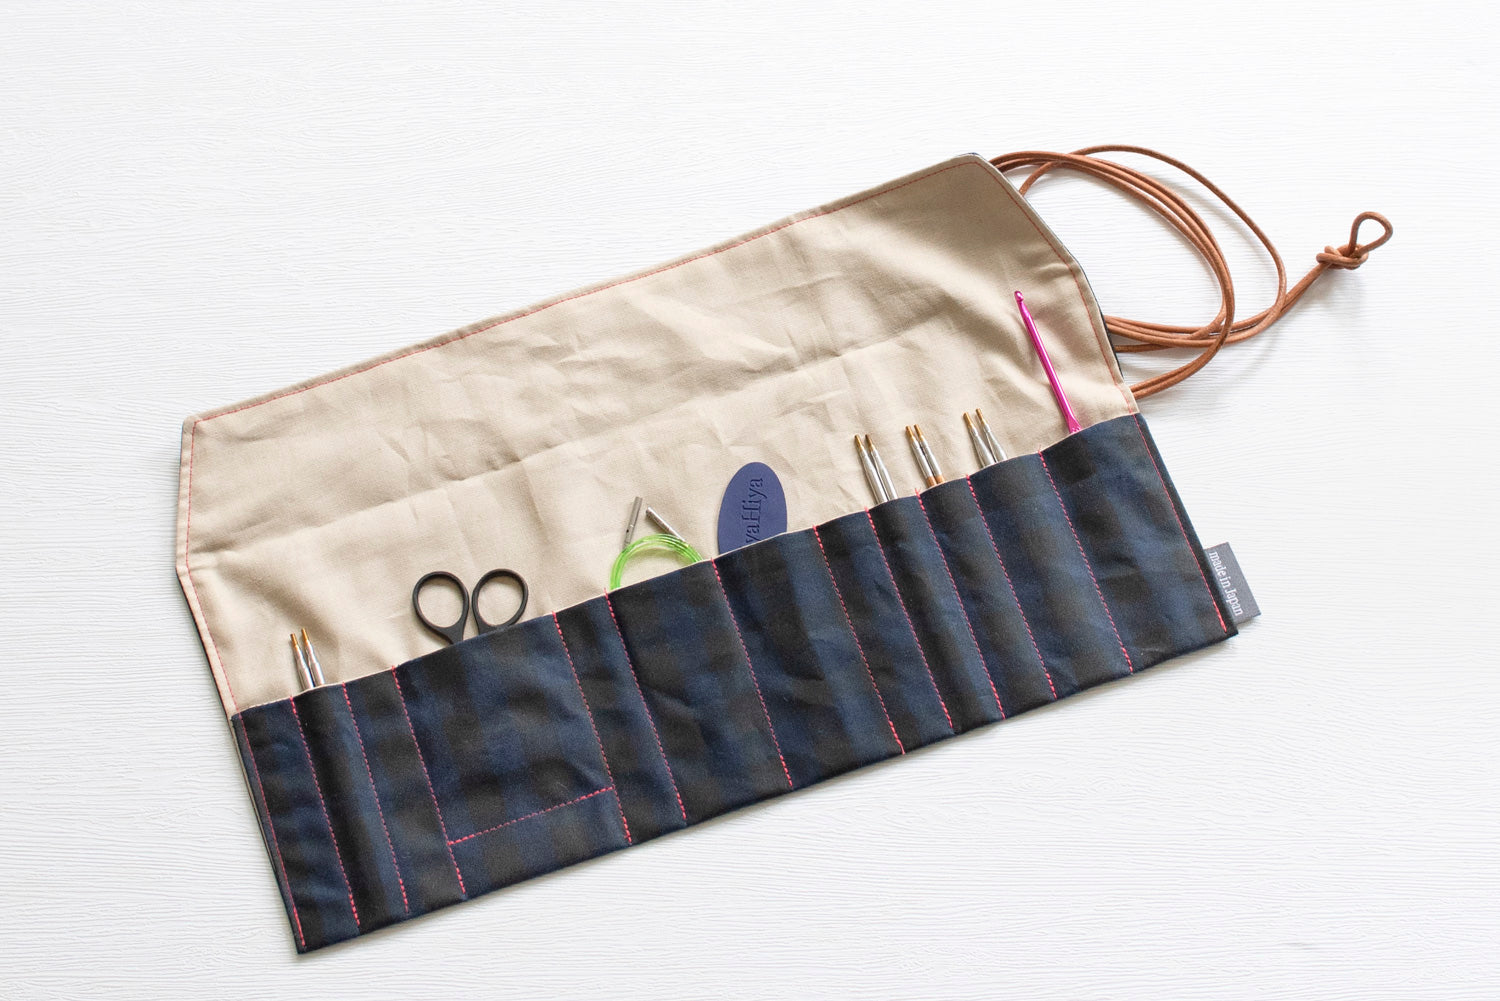 [sewing kit] Project Needle Case